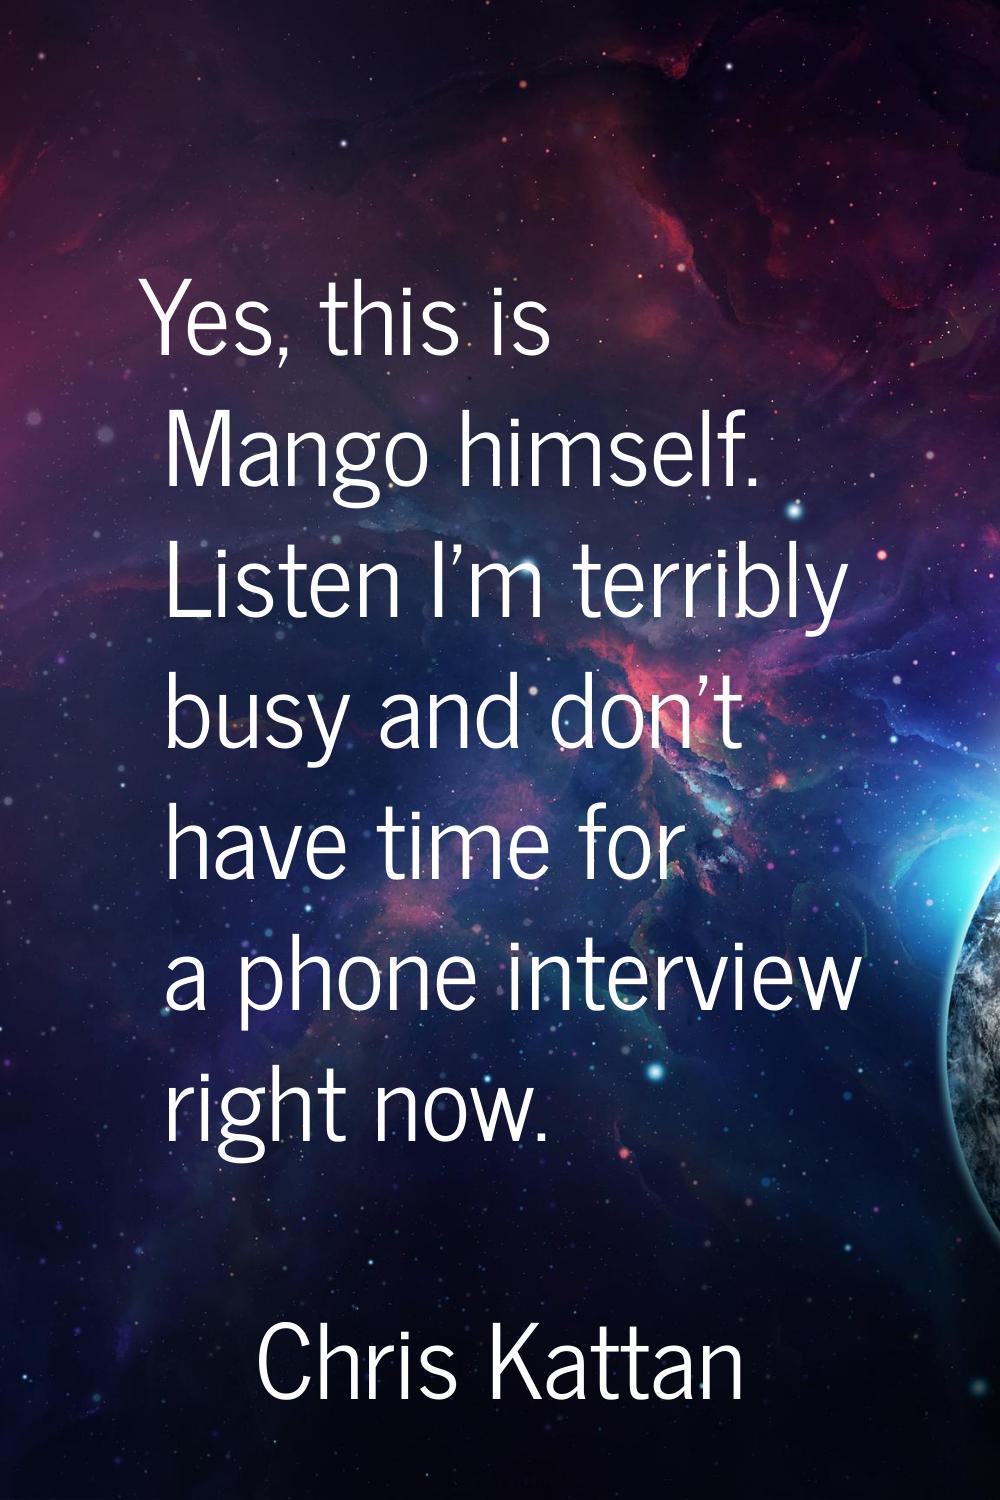 Yes, this is Mango himself. Listen I'm terribly busy and don't have time for a phone interview righ